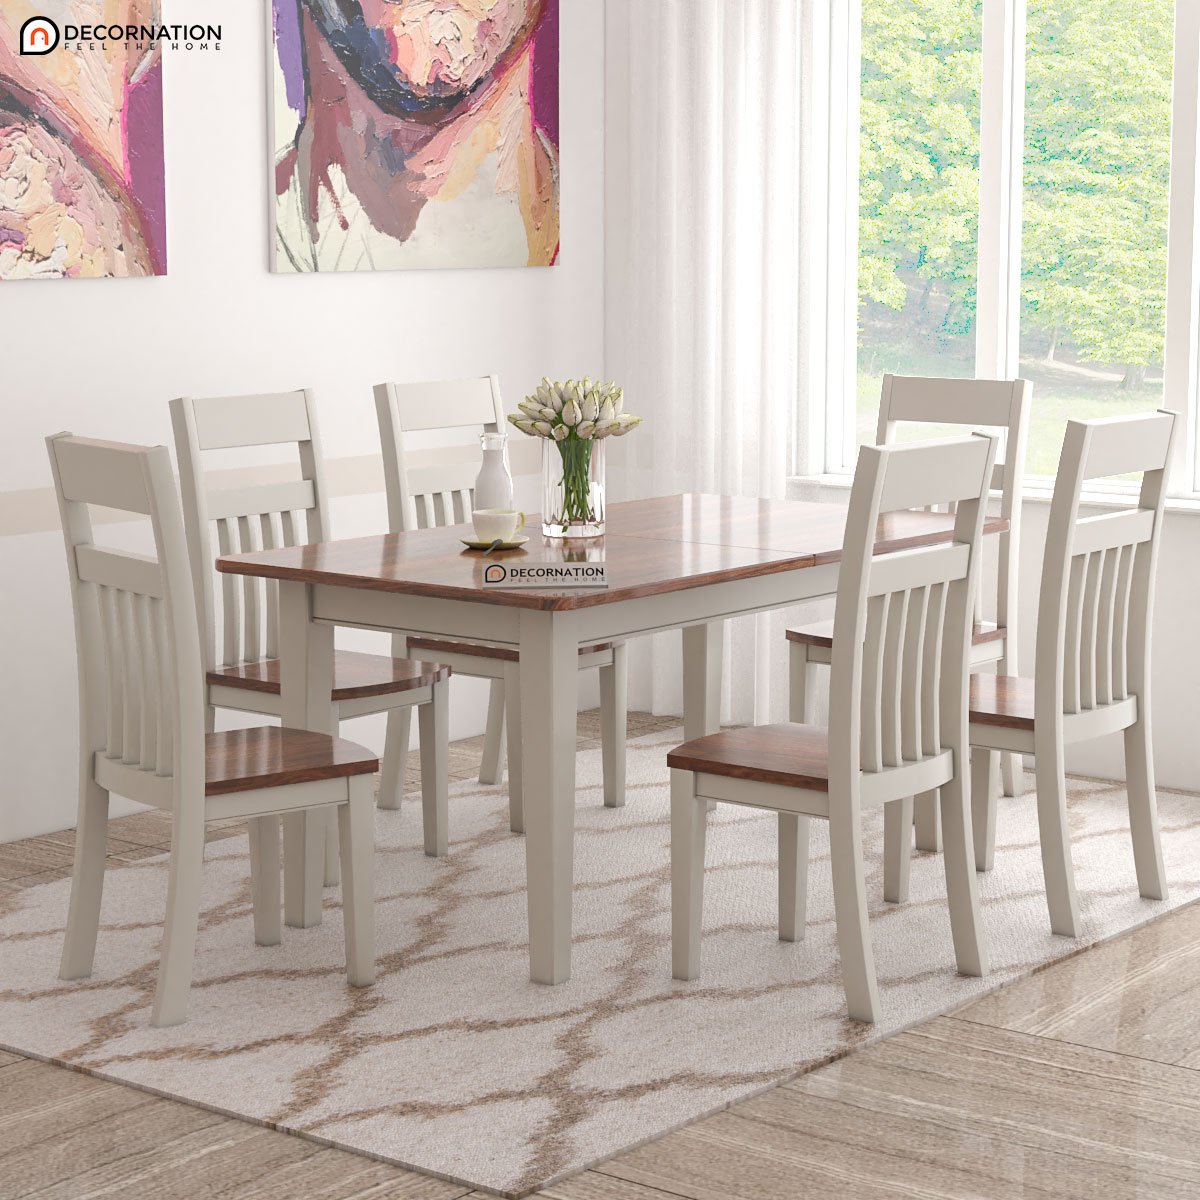 Chimay Wooden 6 Seater Dining Table